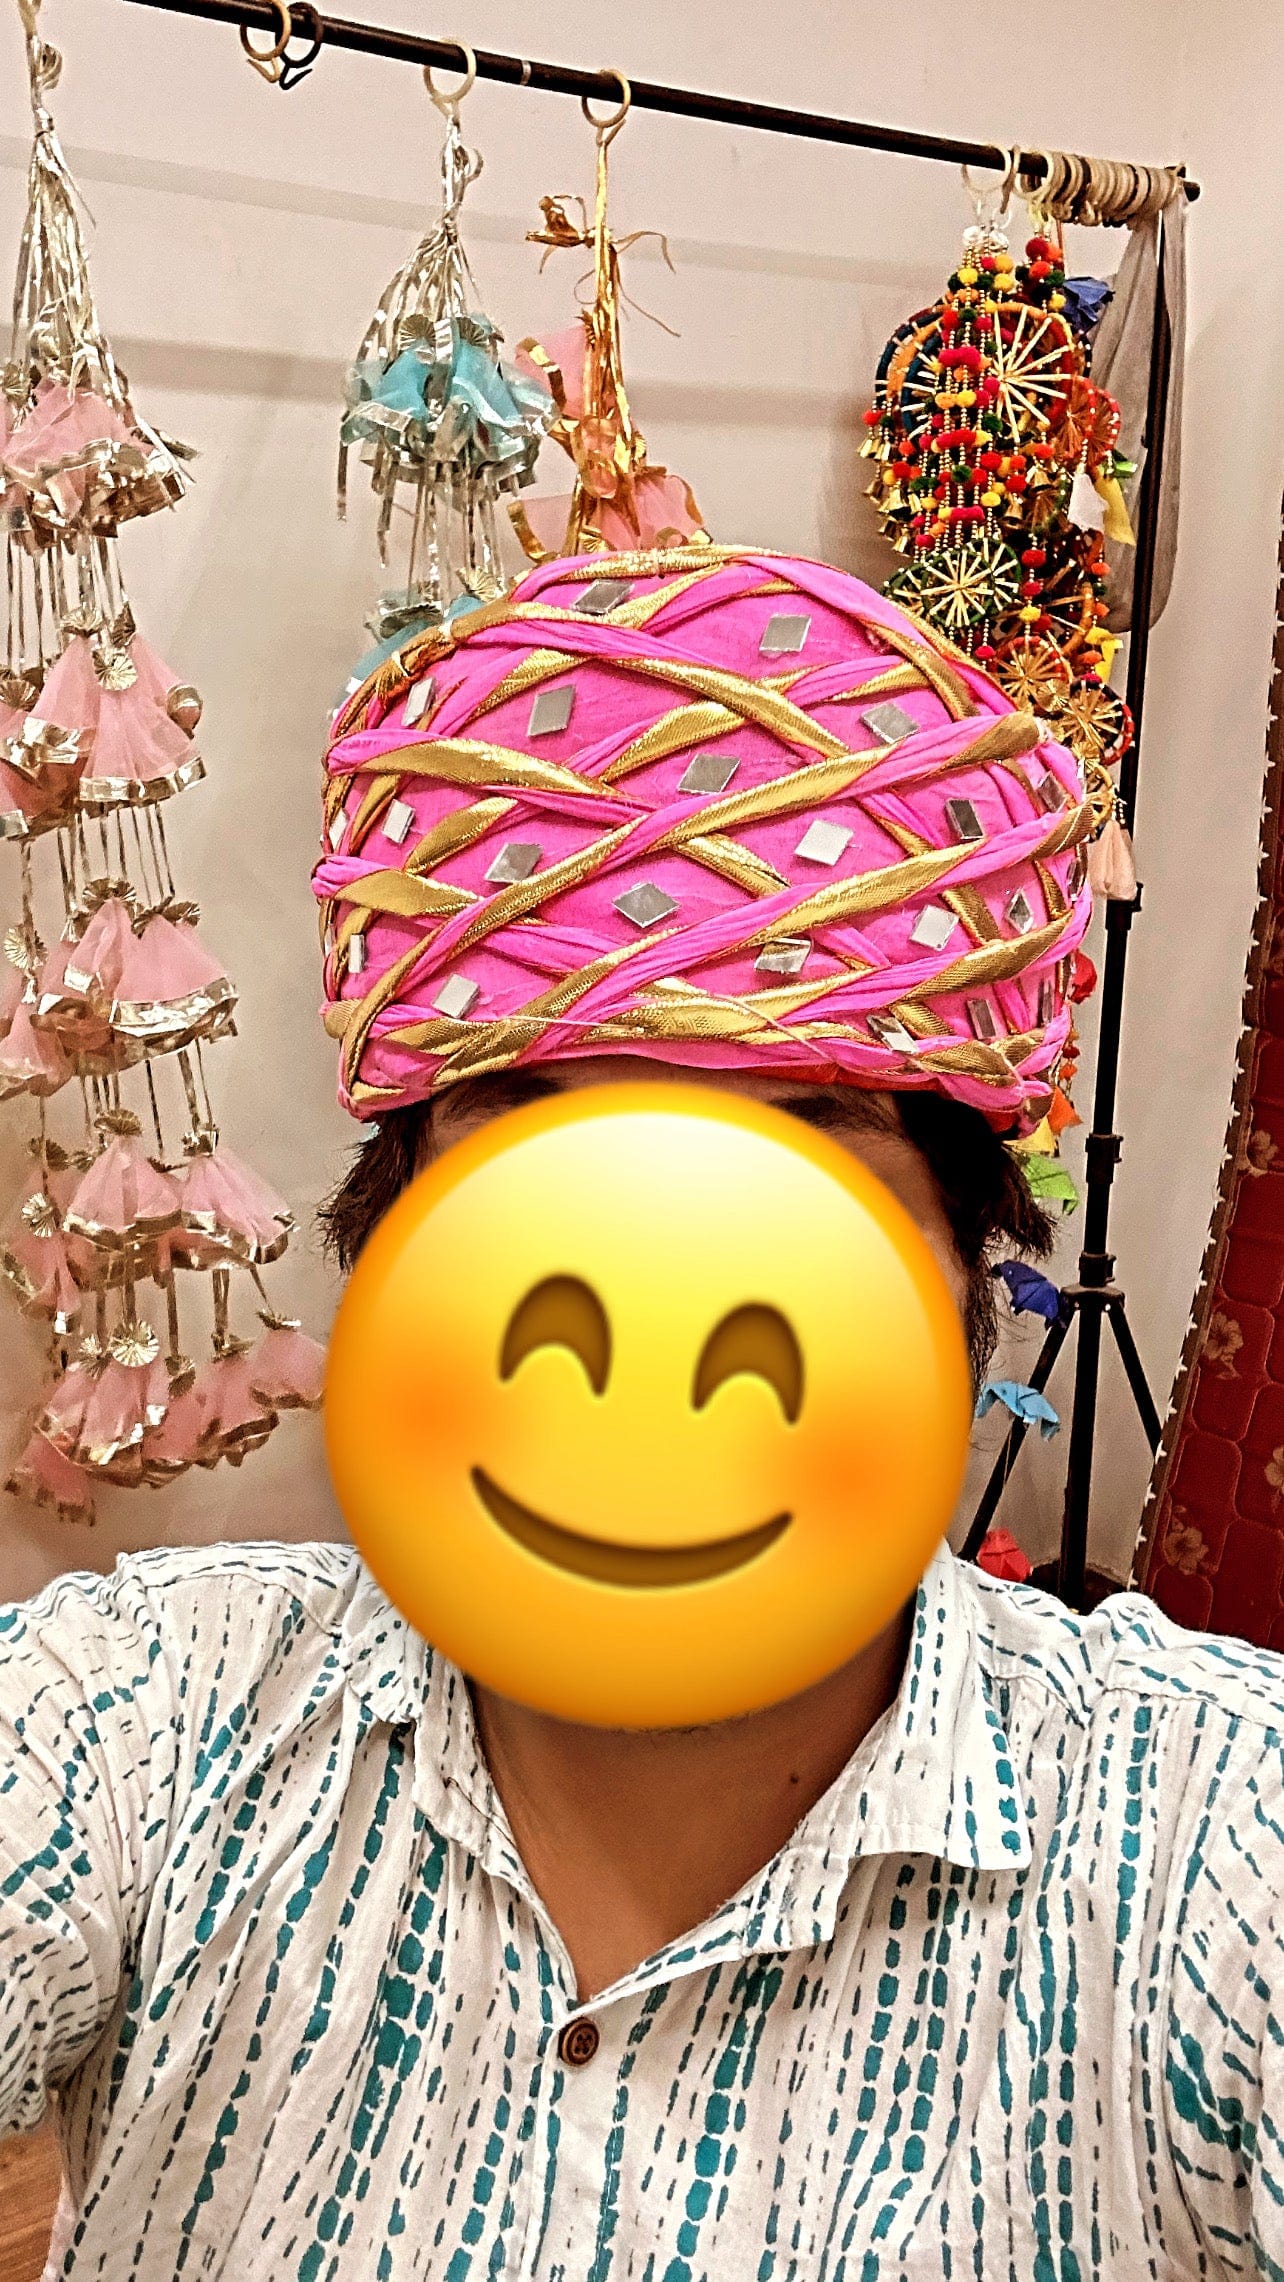 150 Rs each on buying 50+ pcs / WhatsApp at 8619550223 safa pagdi Pack of 10 LAMANSH Pack of 10 Rajasthani Style Readymade Safa Pagdi Turbans for Guests entry welcome in Hotels & Resorts ( Assorted colors ) / Mirror work turbans